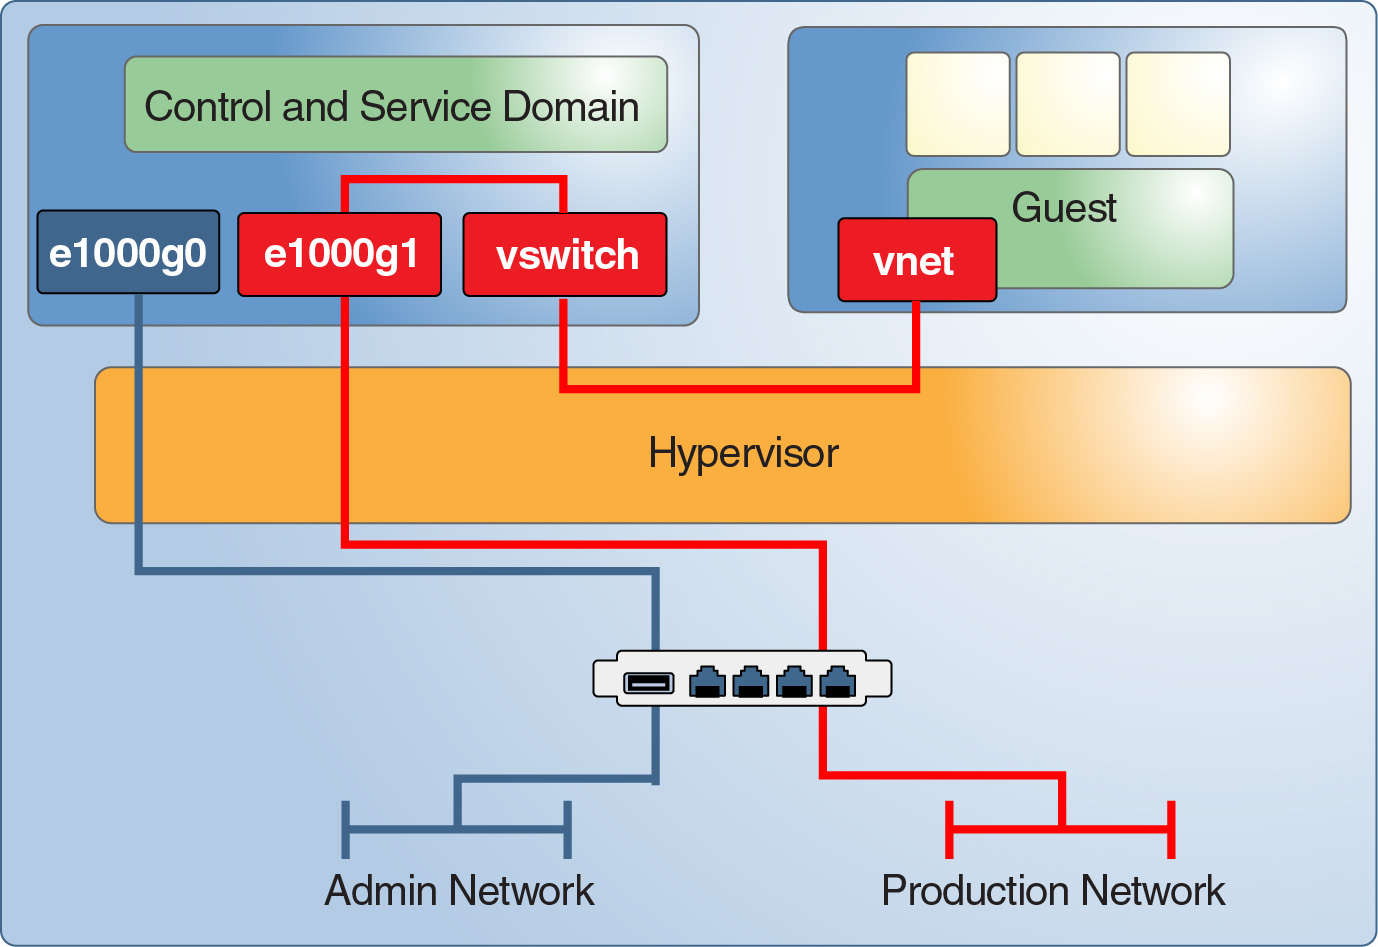 image:Graphic shows how discrete network interfaces support a dedicated management network for the control domain and a production network for the guests.